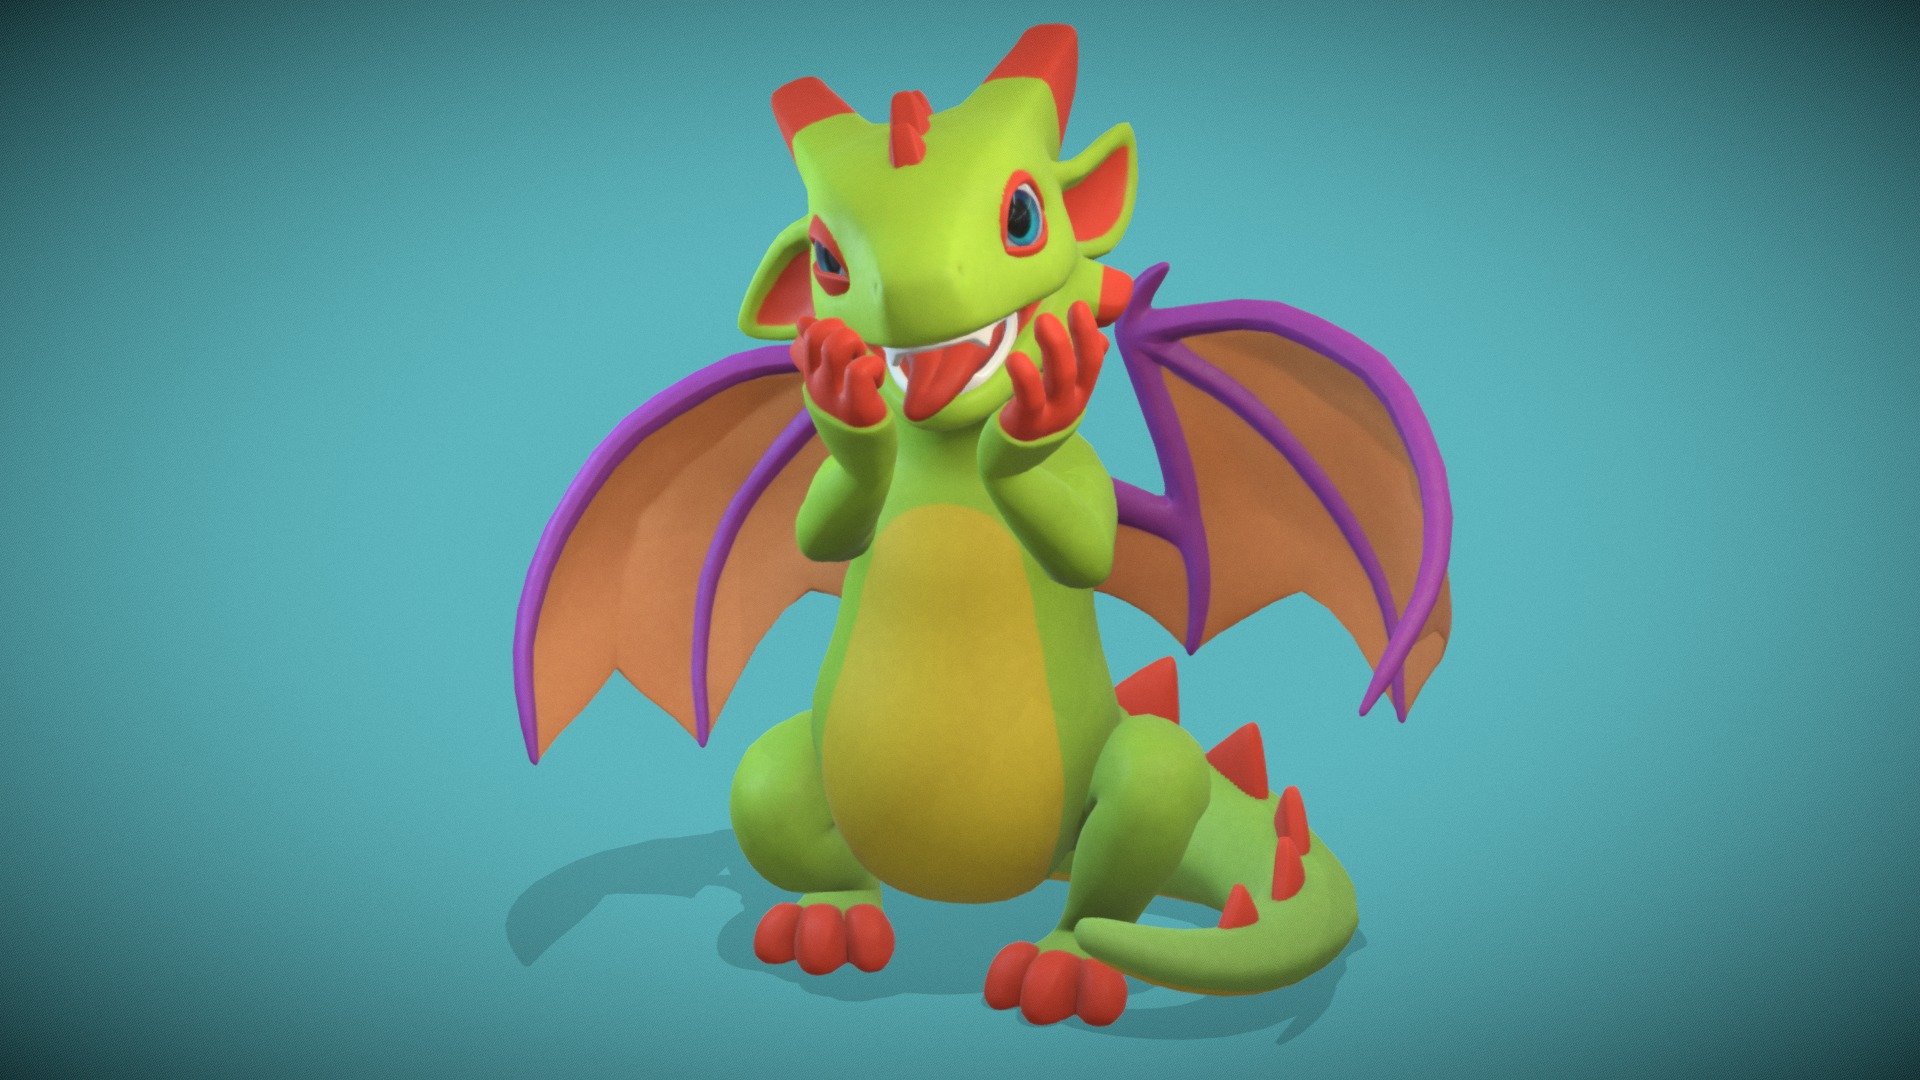 Click the different animation clips to see the different poses and the skinning test animation.

✧

Renders and full tech breakdown on ArtStation.

✧

My original design for a dragon transformation that would fit into Playtonic's Yooka-Laylee franchise!

✧

This model was made for the Playtonic Jam, hosted by Grads in Games and Playtonic. 

Thank you both for hosting this competition and congrats to Playtonic for your 5 year YookaLayleeversary!

The jam was just under 5 weeks long, running from 06/04/22 - 08/05/22.

✧

Zbrush: high poly.

Maya: low poly, UVs, rig, skin, poses, animation.

Substance 3D Painter: textures.

Marmoset Toolbag: bakes, presentation.

Sketchfab: additional presentation.

✧

This artwork is not for sale and is not available for download. Do not use my media for your own profit.

The Yooka-Laylee franchise belongs to Playtonic. This design and model are my own work 3d model